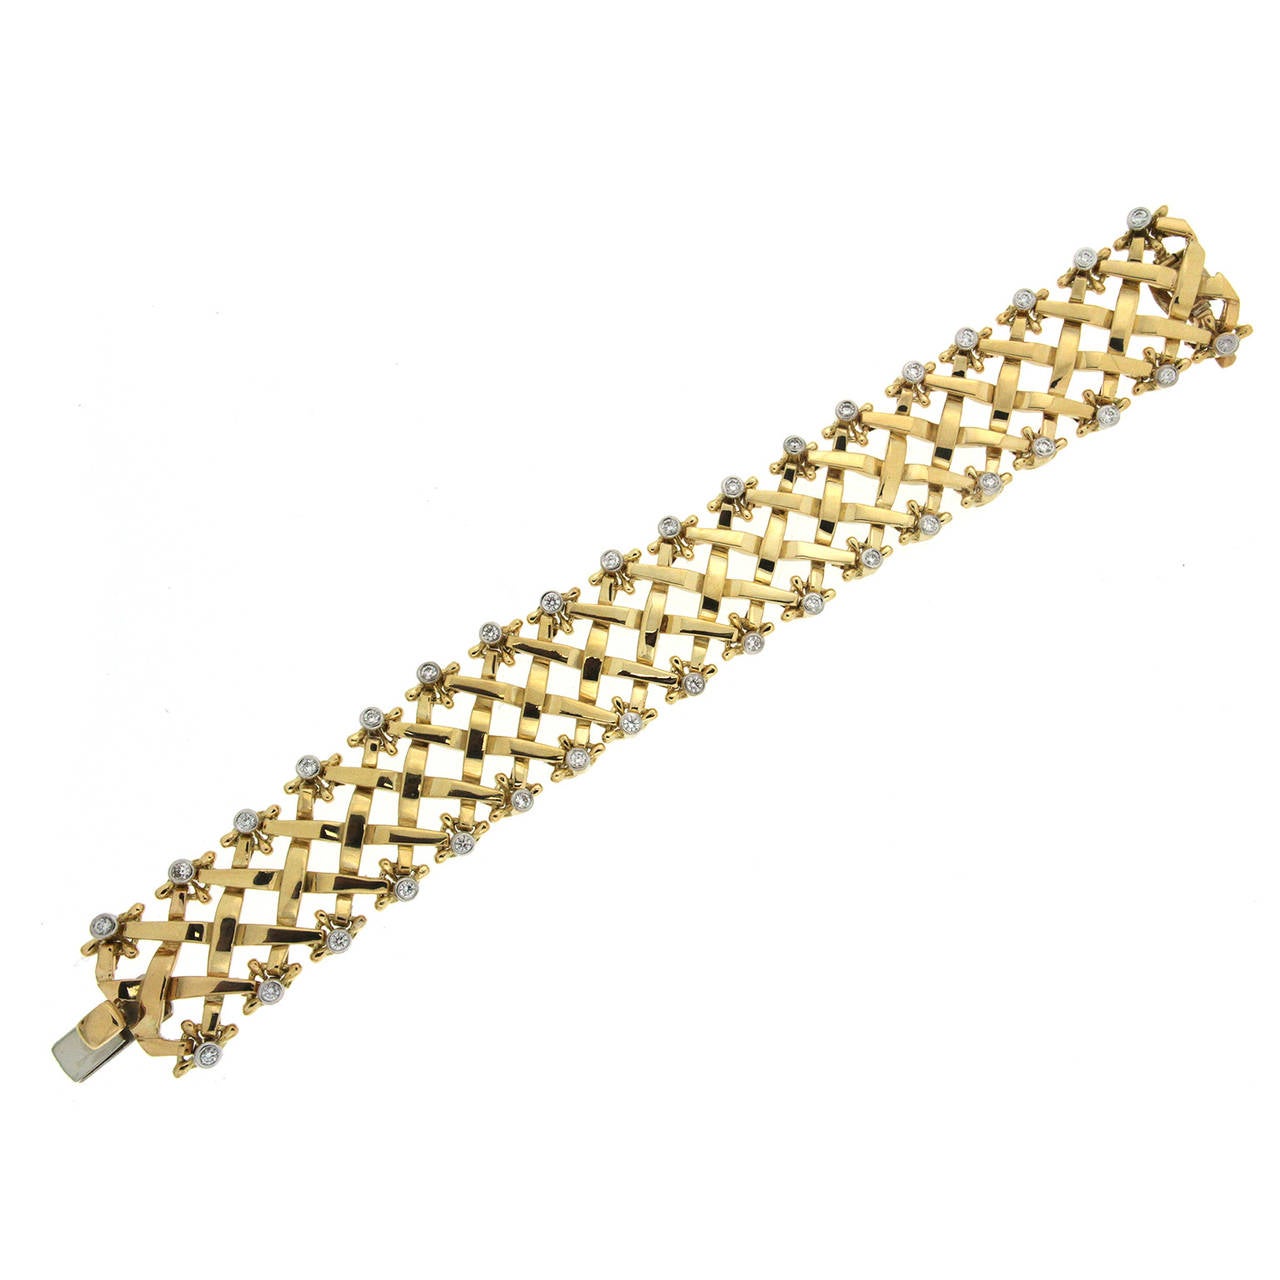 Valentin Magro Yellow Gold Woven Bracelet with Diamonds features a twist on the weave motif. Rather than straight up or down, the 18k yellow gold strips are at an angle. The tips at the edges of the bracelet boast ball designs surrounding round